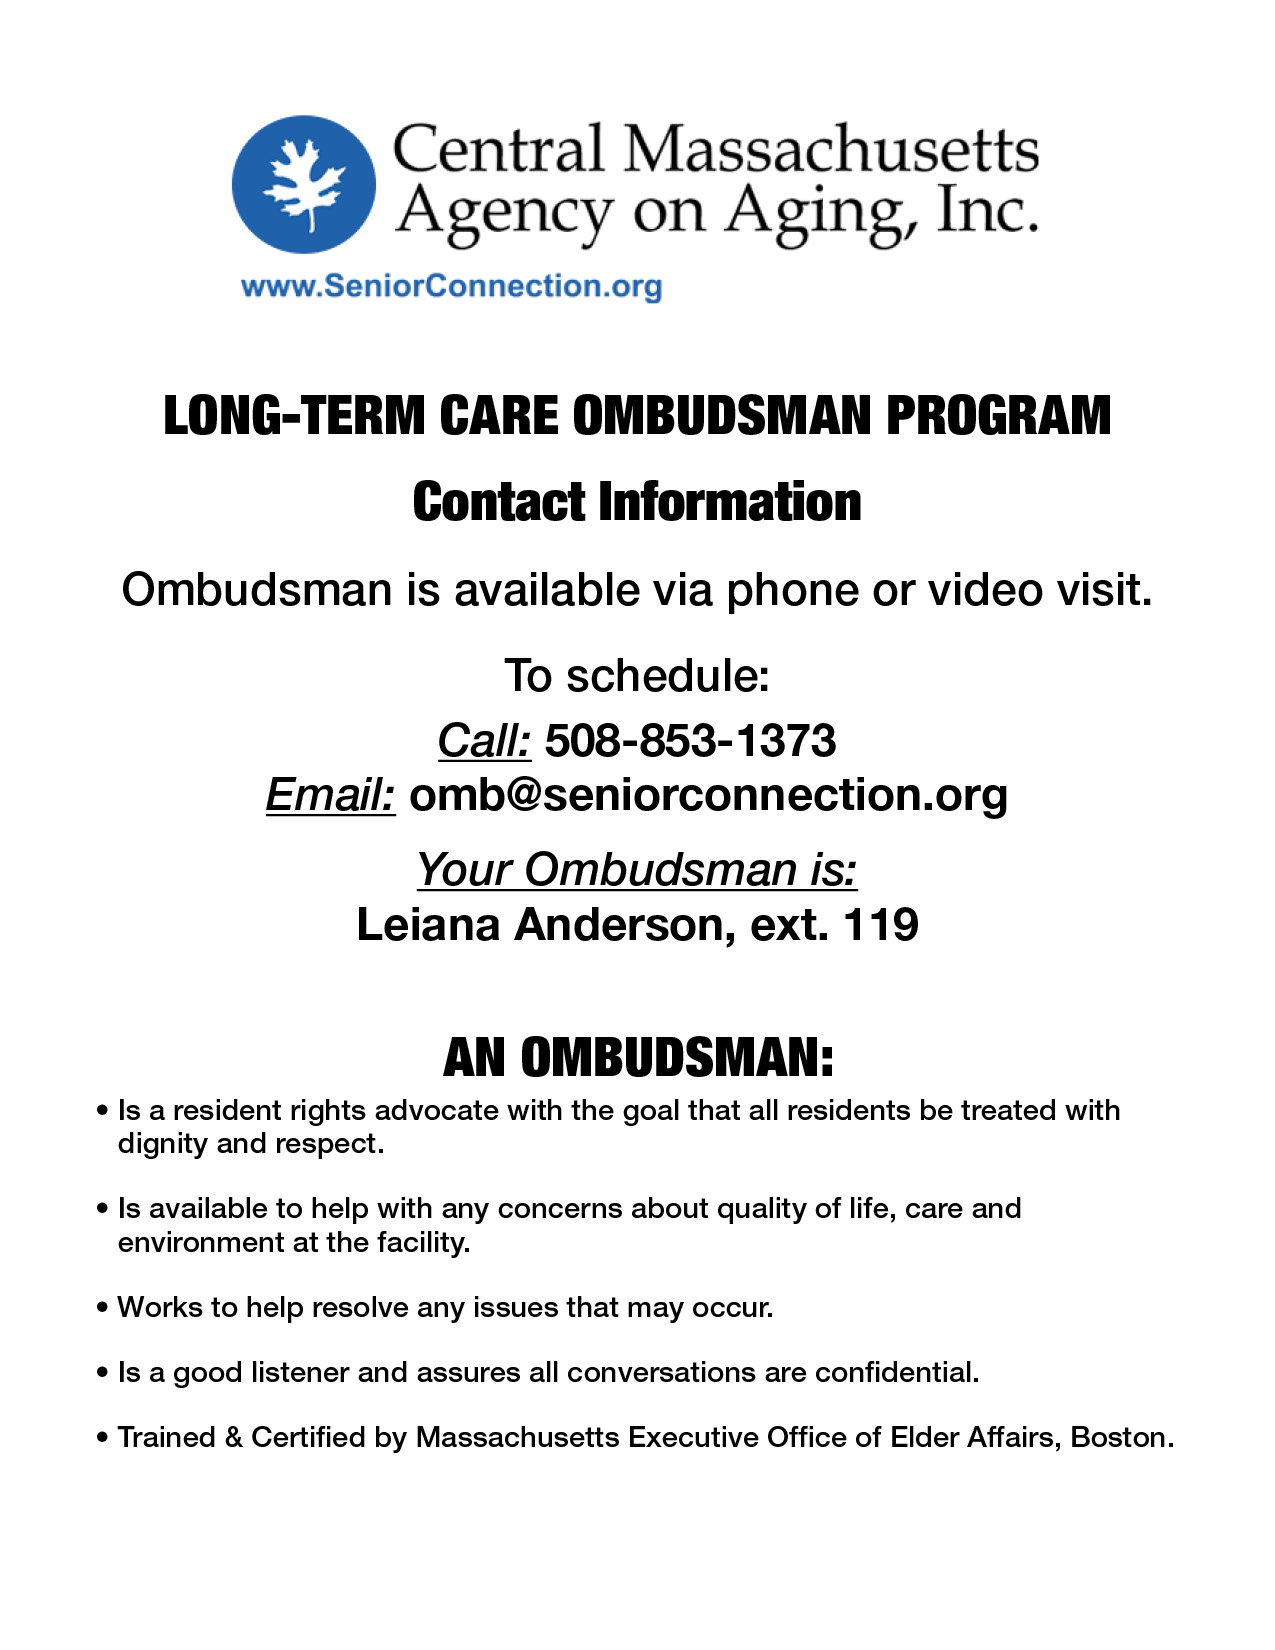 LONG-TERM CARE OMBUDSMAN PROGRAM

Contact Information

Ombudsman is available via phone or video visit.

To schedule:

Call: 508-853-1373

Email: omb@seniorconnection.org

Your Ombudsman is:

Leiana Anderson, ext. 119

AN OMBUDSMAN:

• Is a resident rights advocate with the goal that all residents be treated with 
dignity and respect. 

• Is available to help with any concerns about quality of life, care and 
environment at the facility.

• Works to help resolve any issues that may occur.

• Is a good listener and assures all conversations are confidential.

• Trained & Certified by Massachusetts Executive Office of Elder Affairs, Boston.



